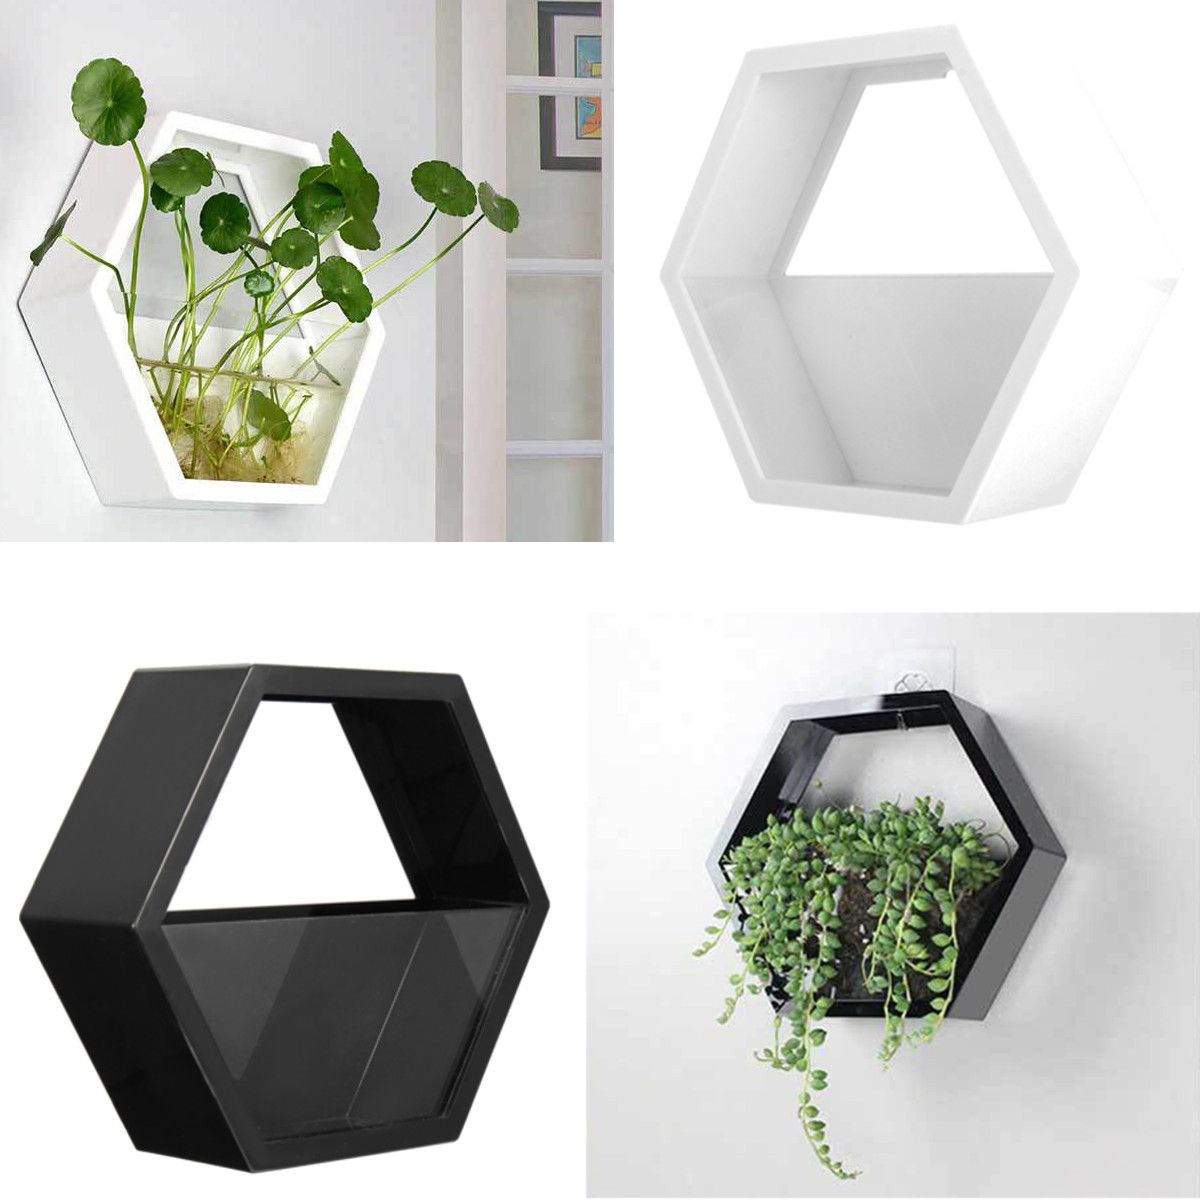 Hexagon-Hanging-Wall-Basket-Plant-Flower-Pot-Box-for-Home-Balcony-Garden-Decorations-1554282